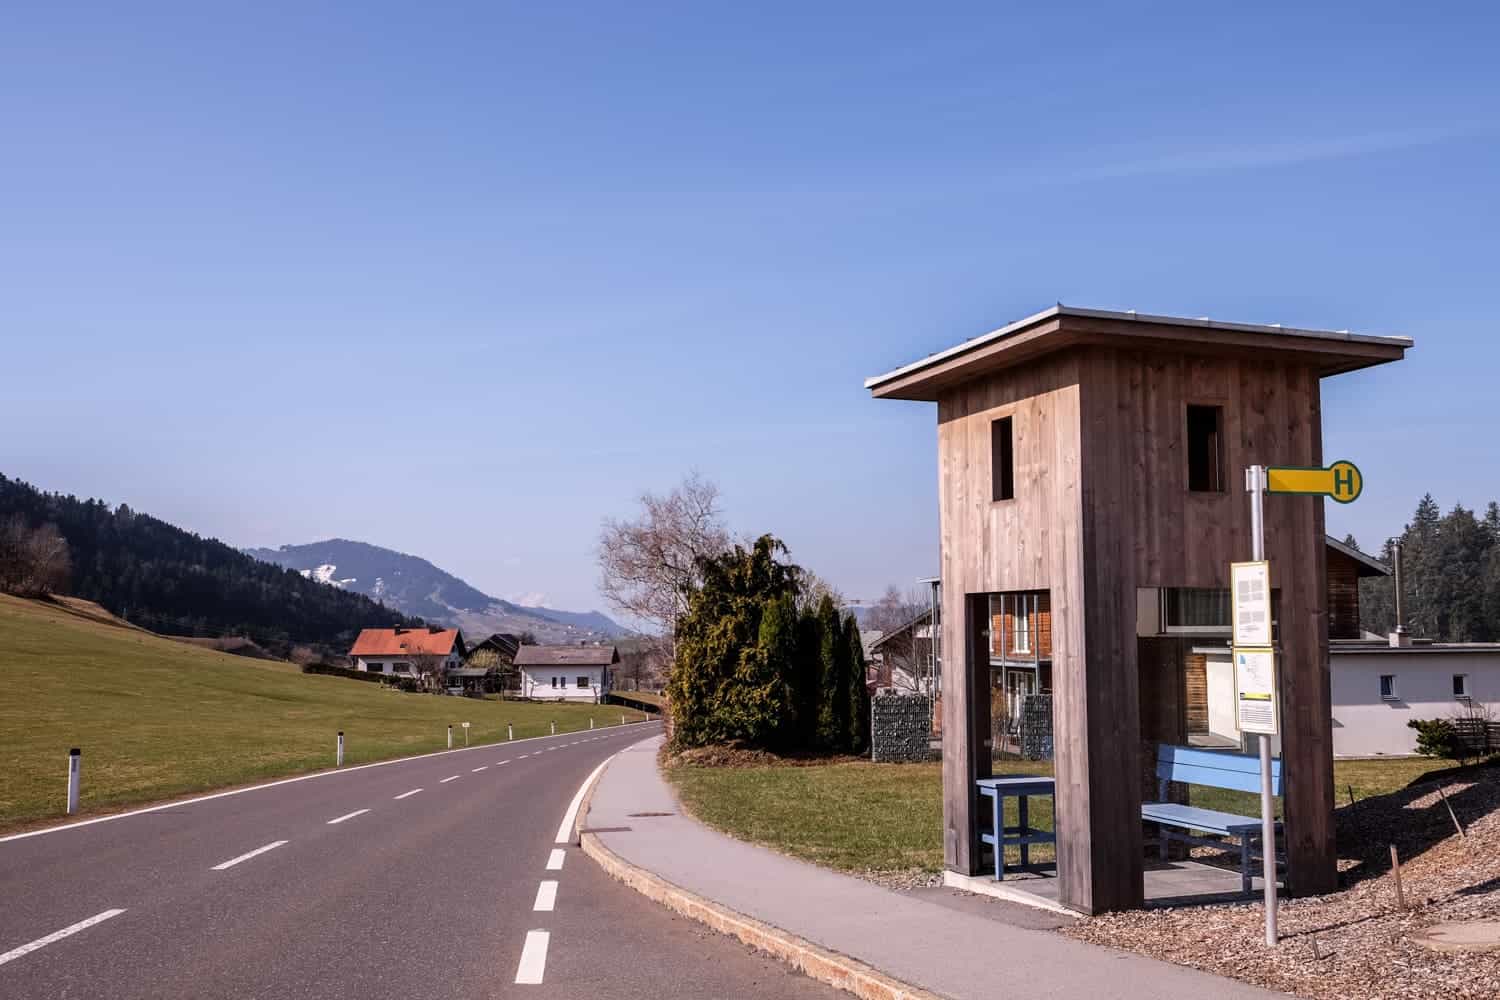 One of the famous seven bus Stops in Krumbach, Vorarlberg, Austria